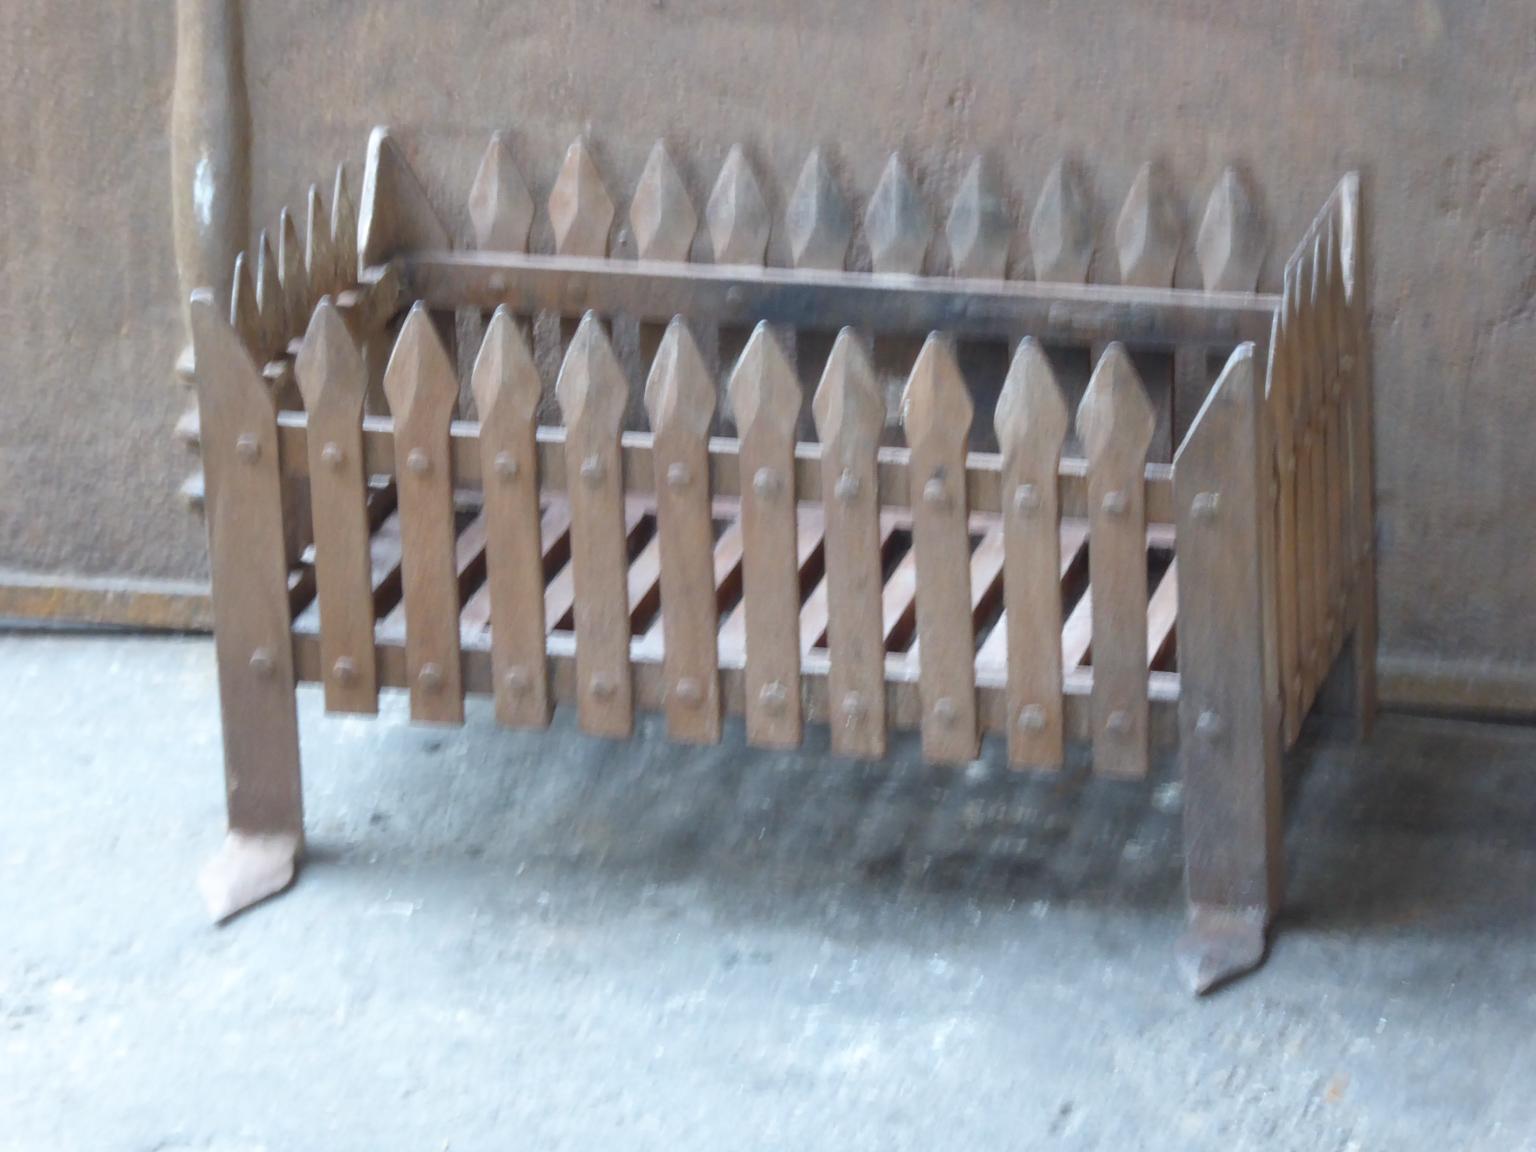 20th century English neo Gothic fireplace style basket or fire basket. The fireplace grate is made of wrought iron and cast iron. It has a natural brown patina.

















 